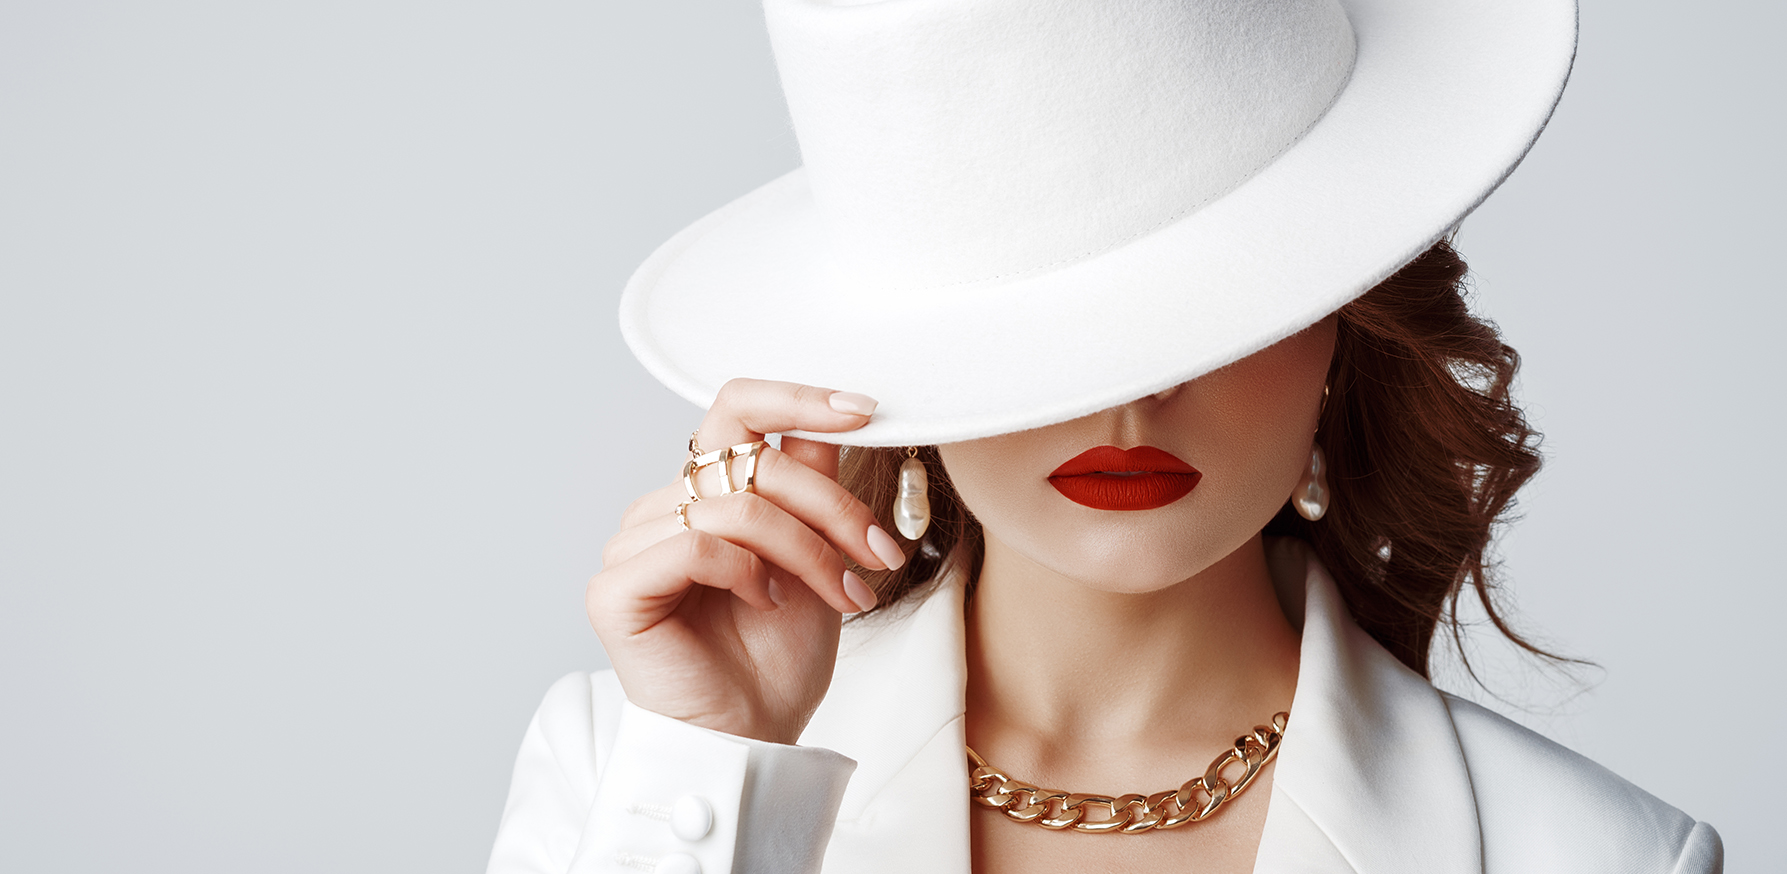 power-of-accessorizing-elevate-your-outfits-jewelry-woman-in-white-hat-tipping-it-down-fashion